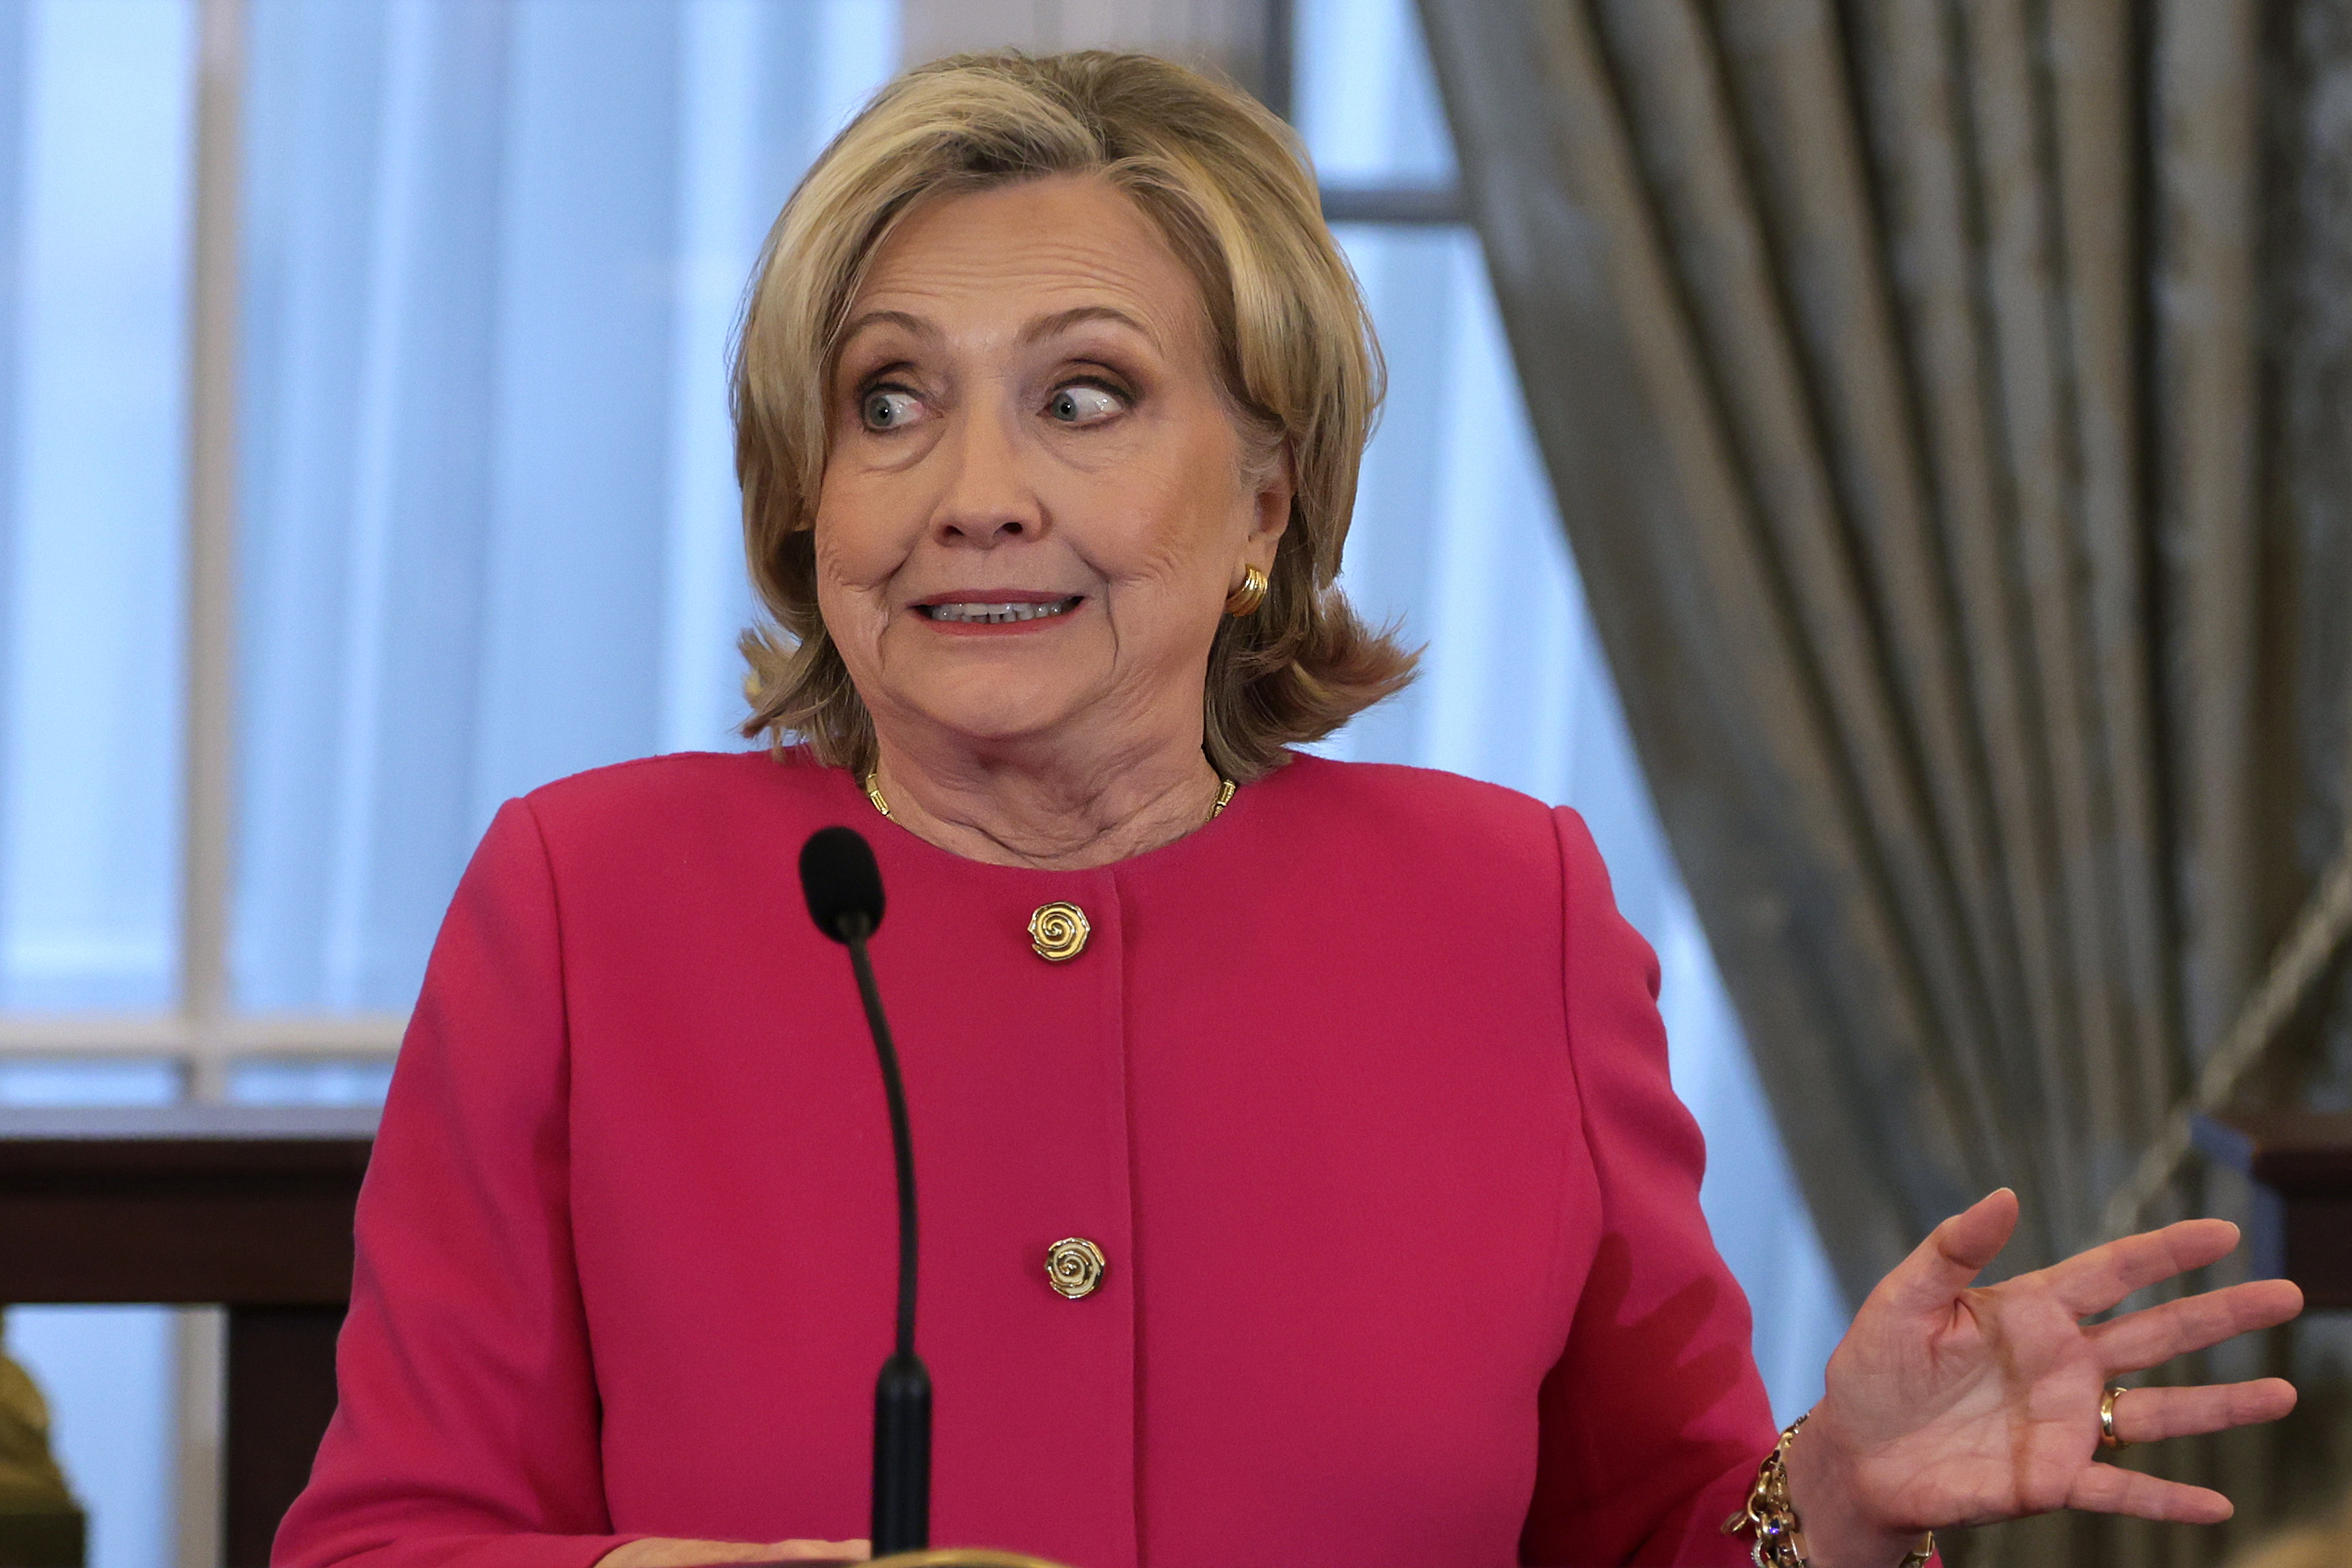 hilary making a yikes face behind the podium